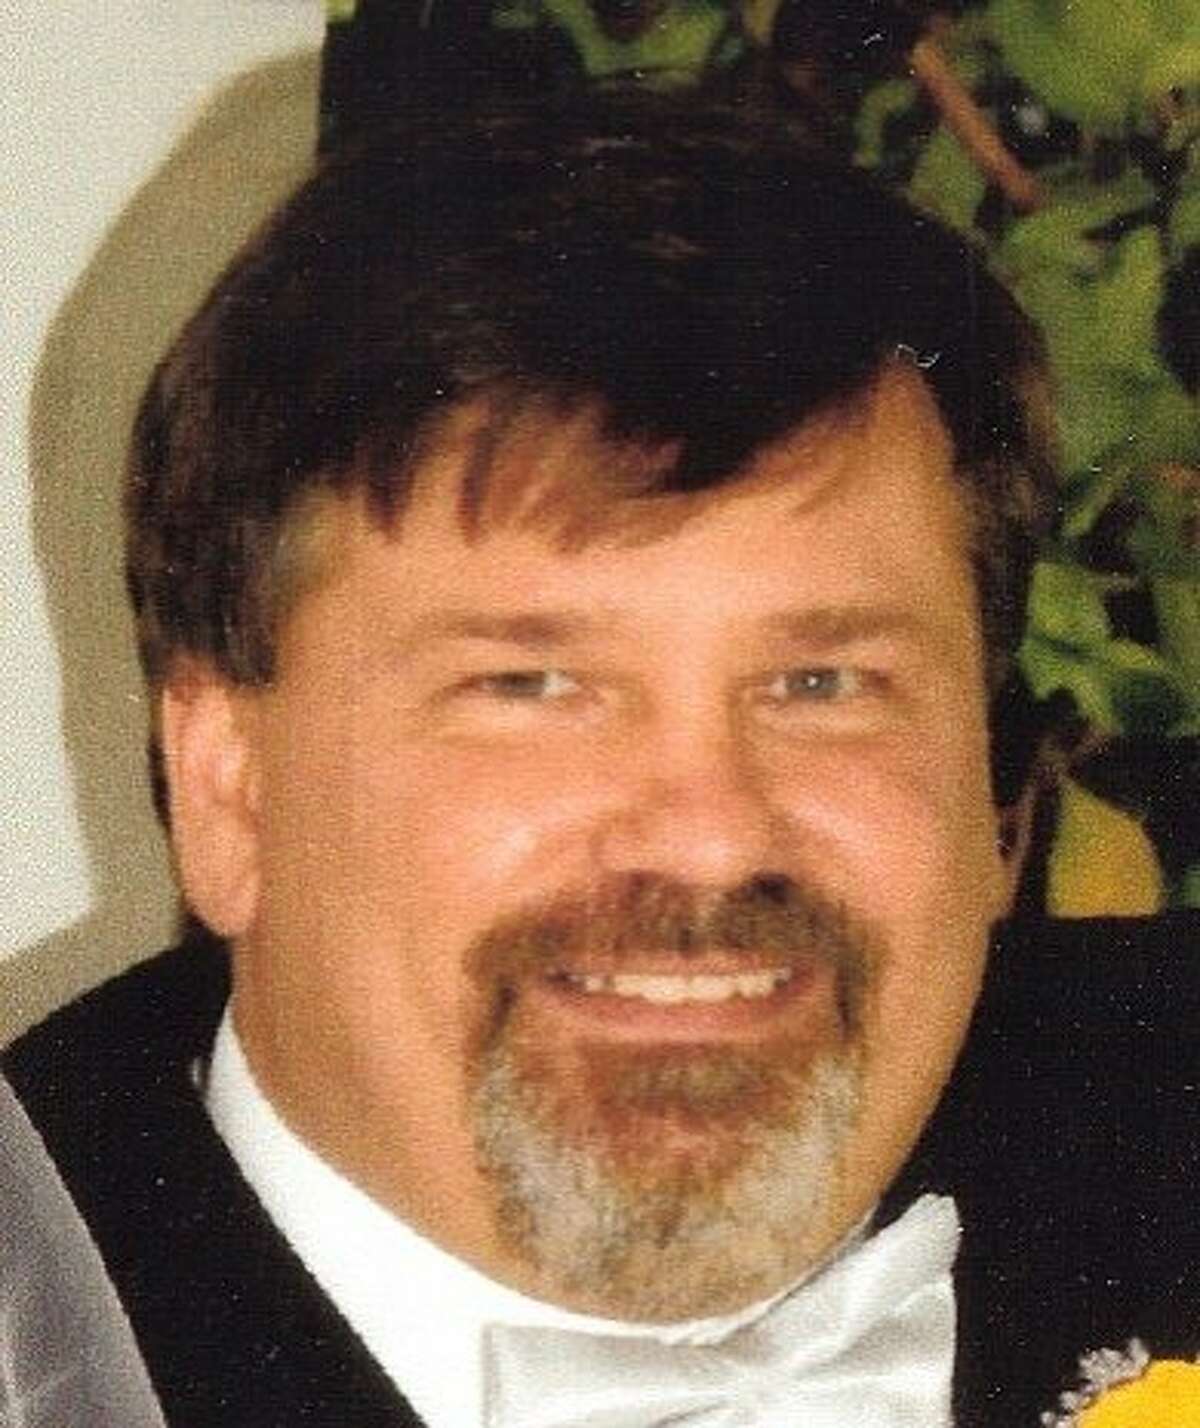 James Strickland, a track inspector for BART, was struck and killed by a train on October 14, 2008 in Concord, Calif. The train was traveling in the opposite direction than it usually would and hit Strickland from behind.